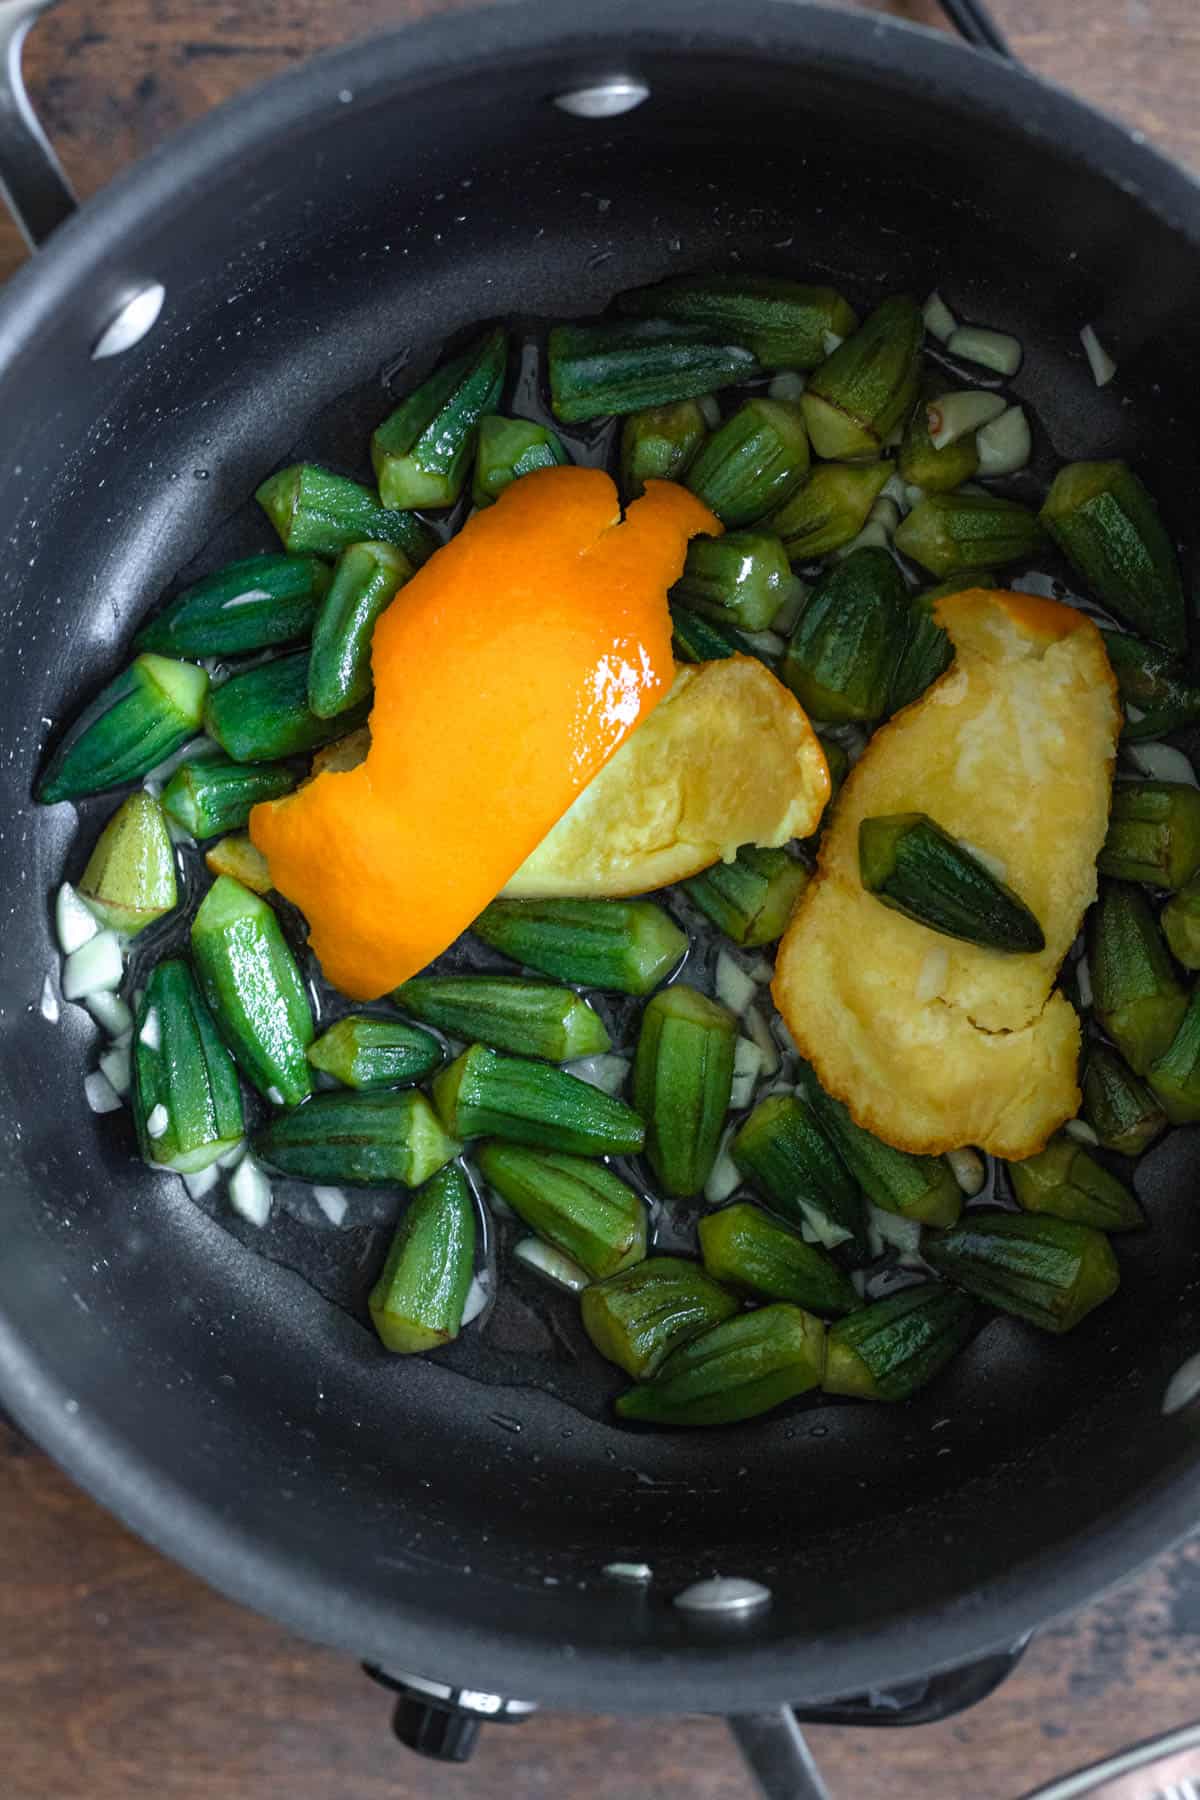 Cooking bamya by adding okra and the orange peel with the garlic and salt to the pot.